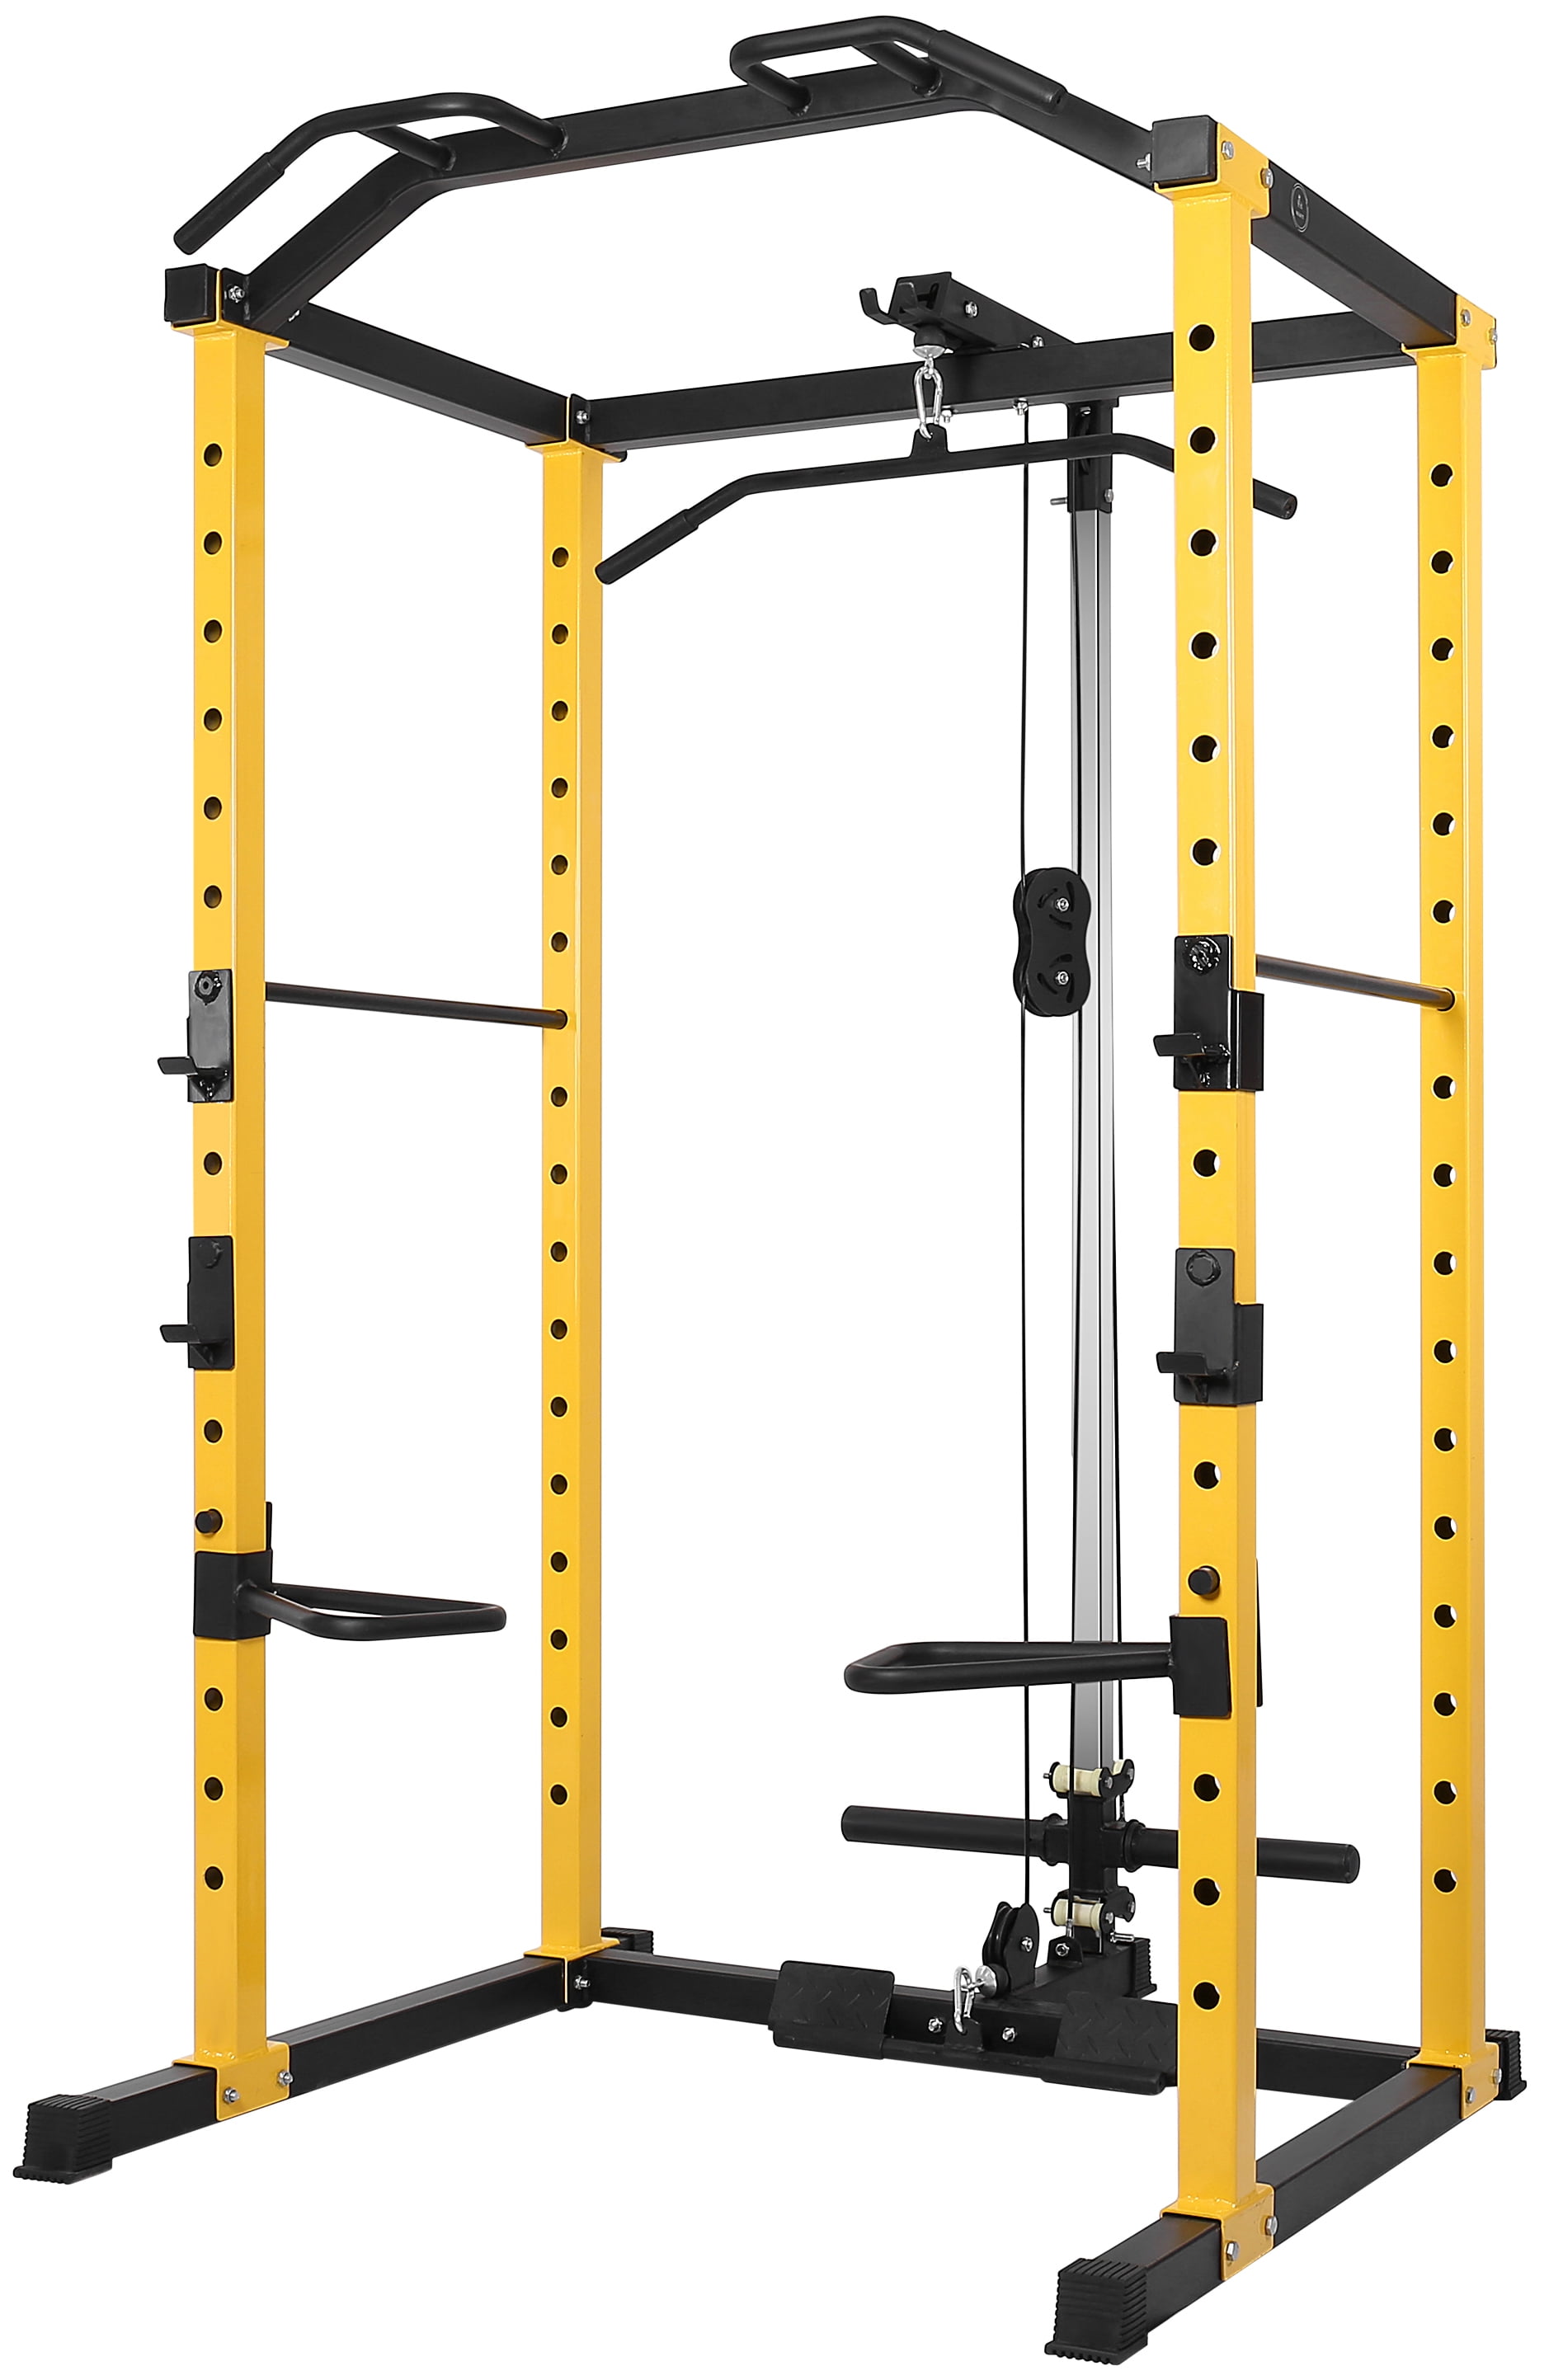 Details about   1000-Pound Capacity Multi-Function Adjustable Power Cage with J-Hooks Home Gym 